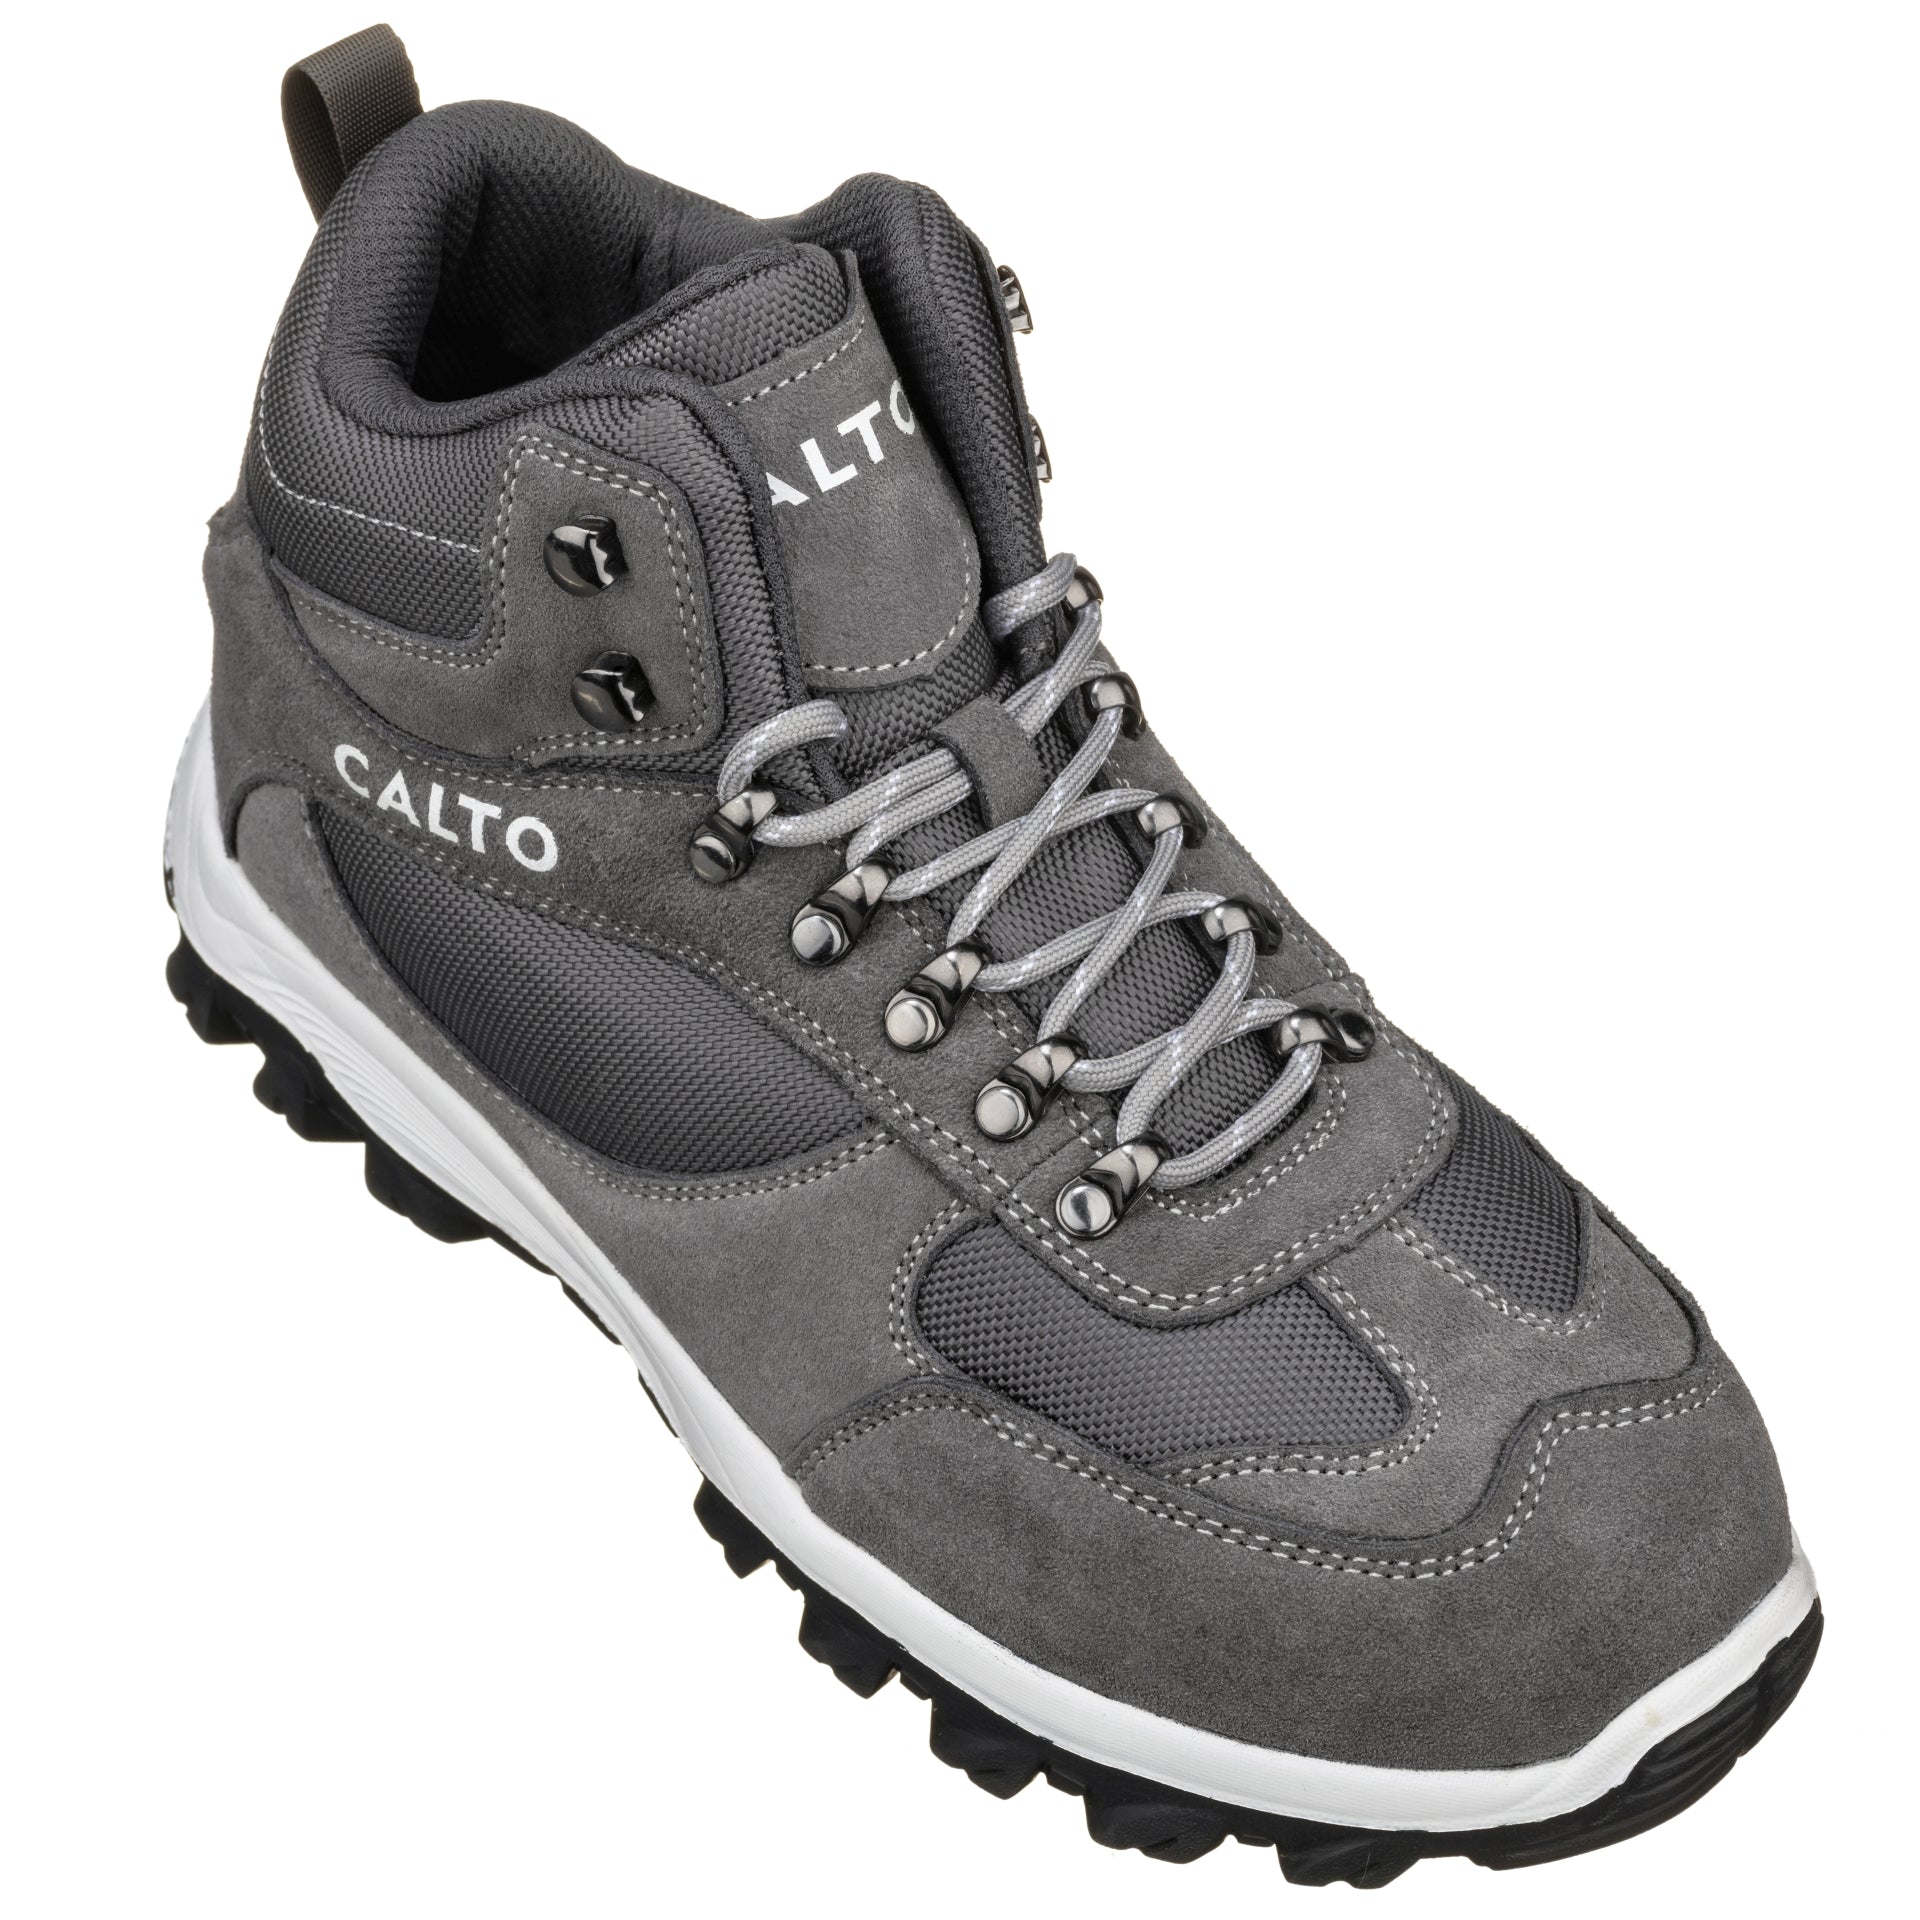 Elevator shoes height increase CALTO - S3502 - 3.2 Inches Taller (Nubuck Grey) - Sneakers